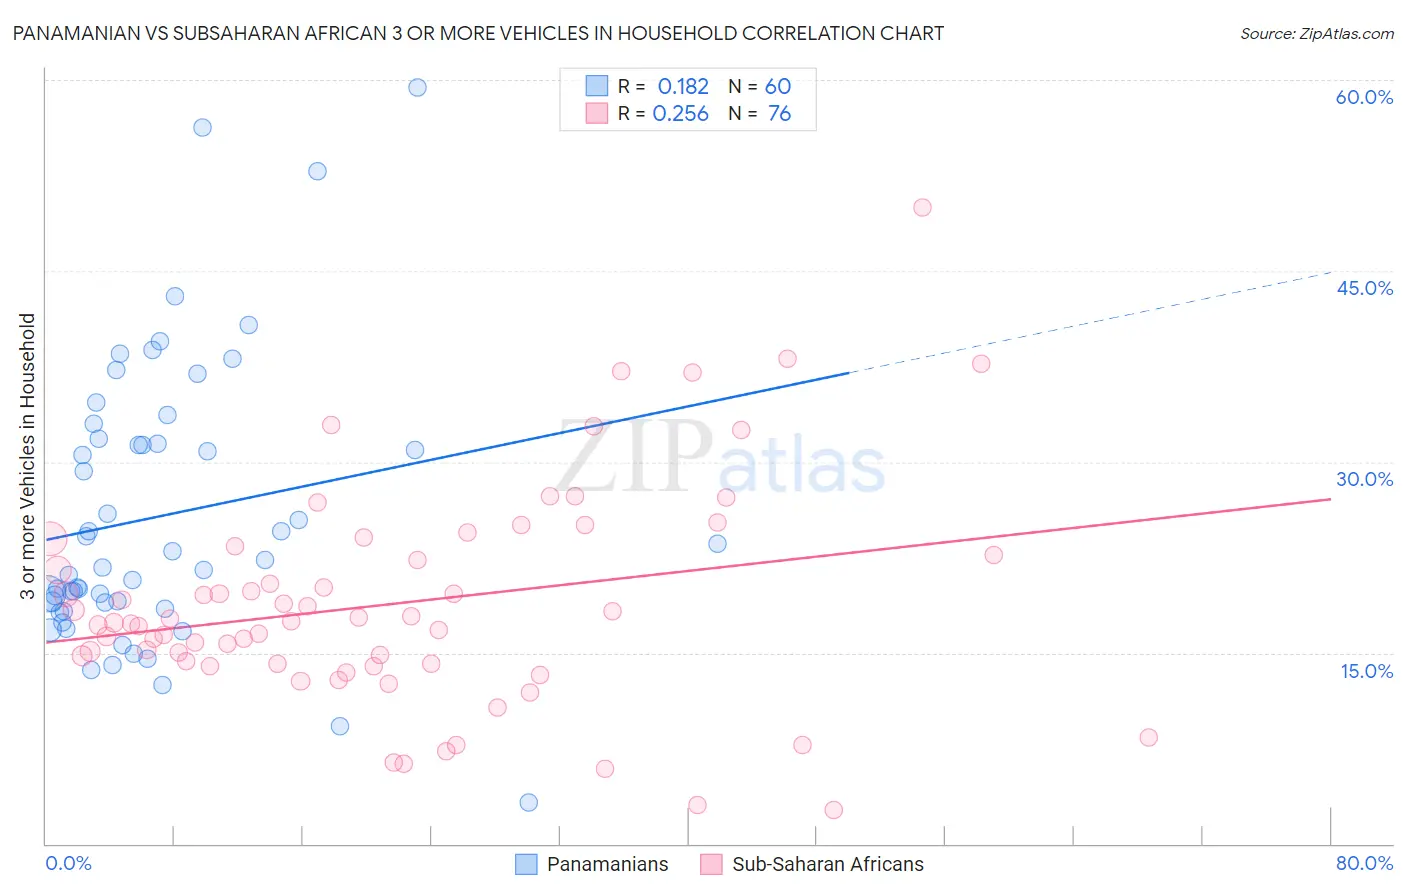 Panamanian vs Subsaharan African 3 or more Vehicles in Household